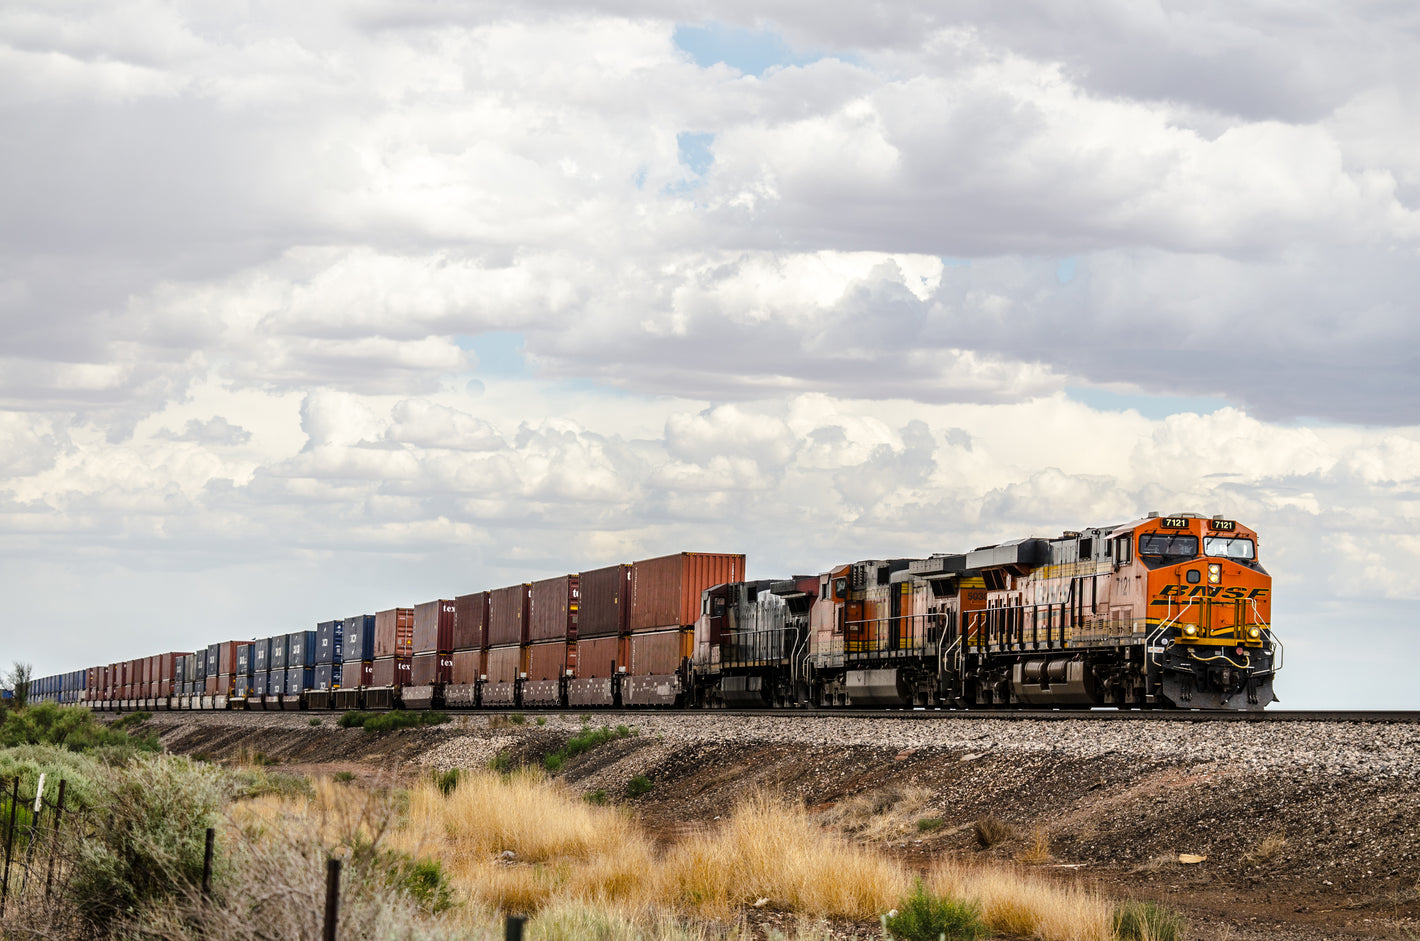 a-freight-train-hauls-containers-through-the-plains - DWC ETERNITY®